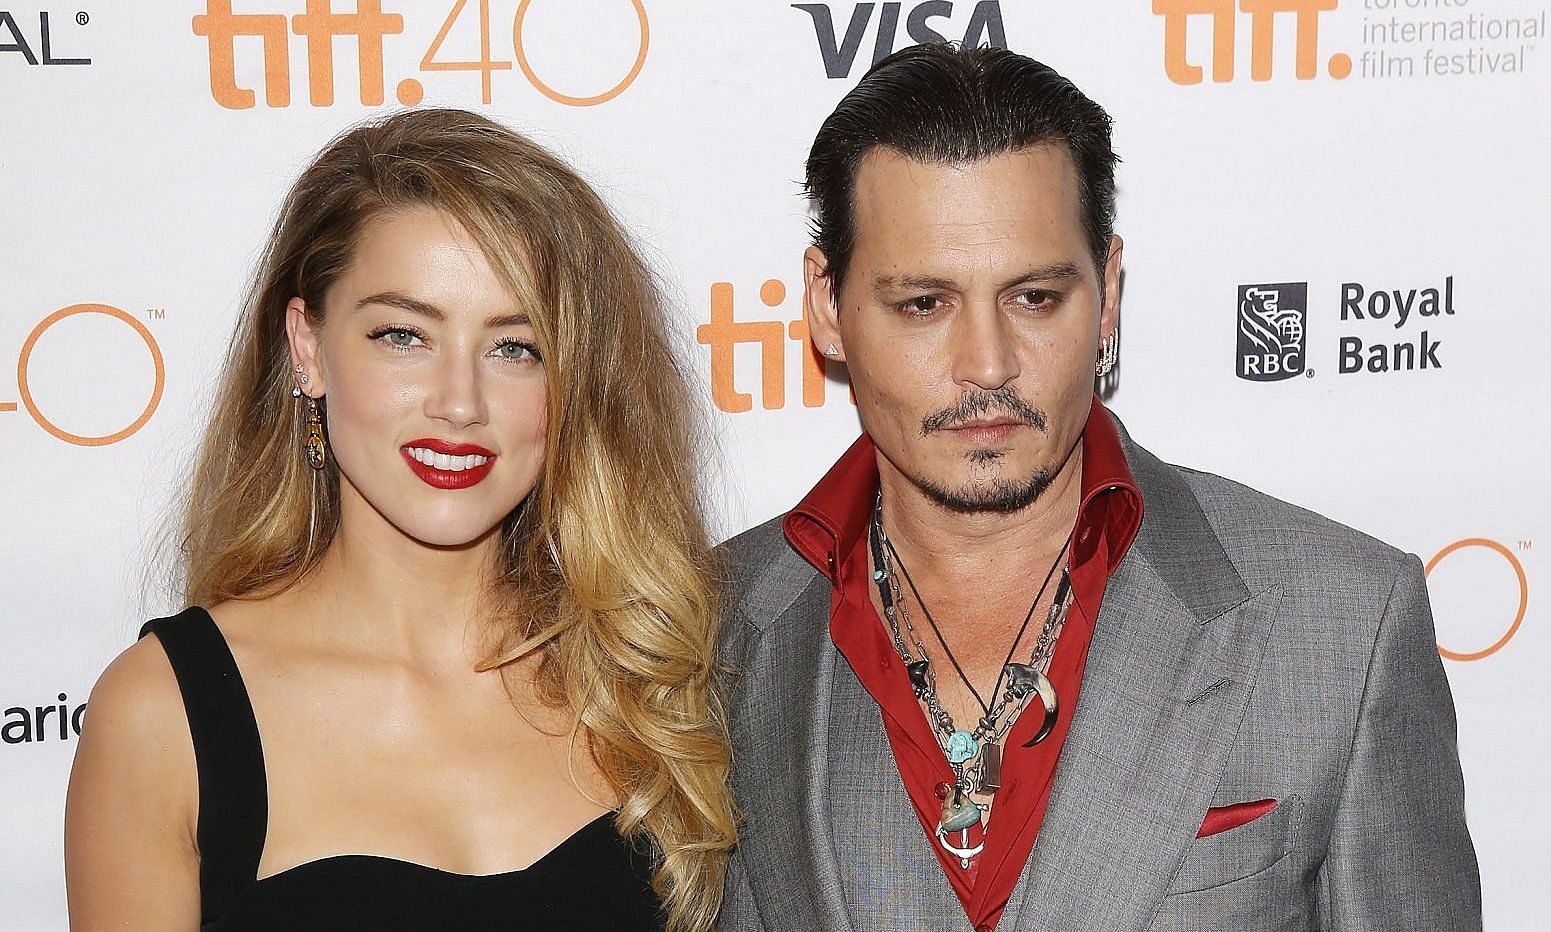 Who is Keenan Wyatt? Johnny Depp's friend and sound engineer claims ...